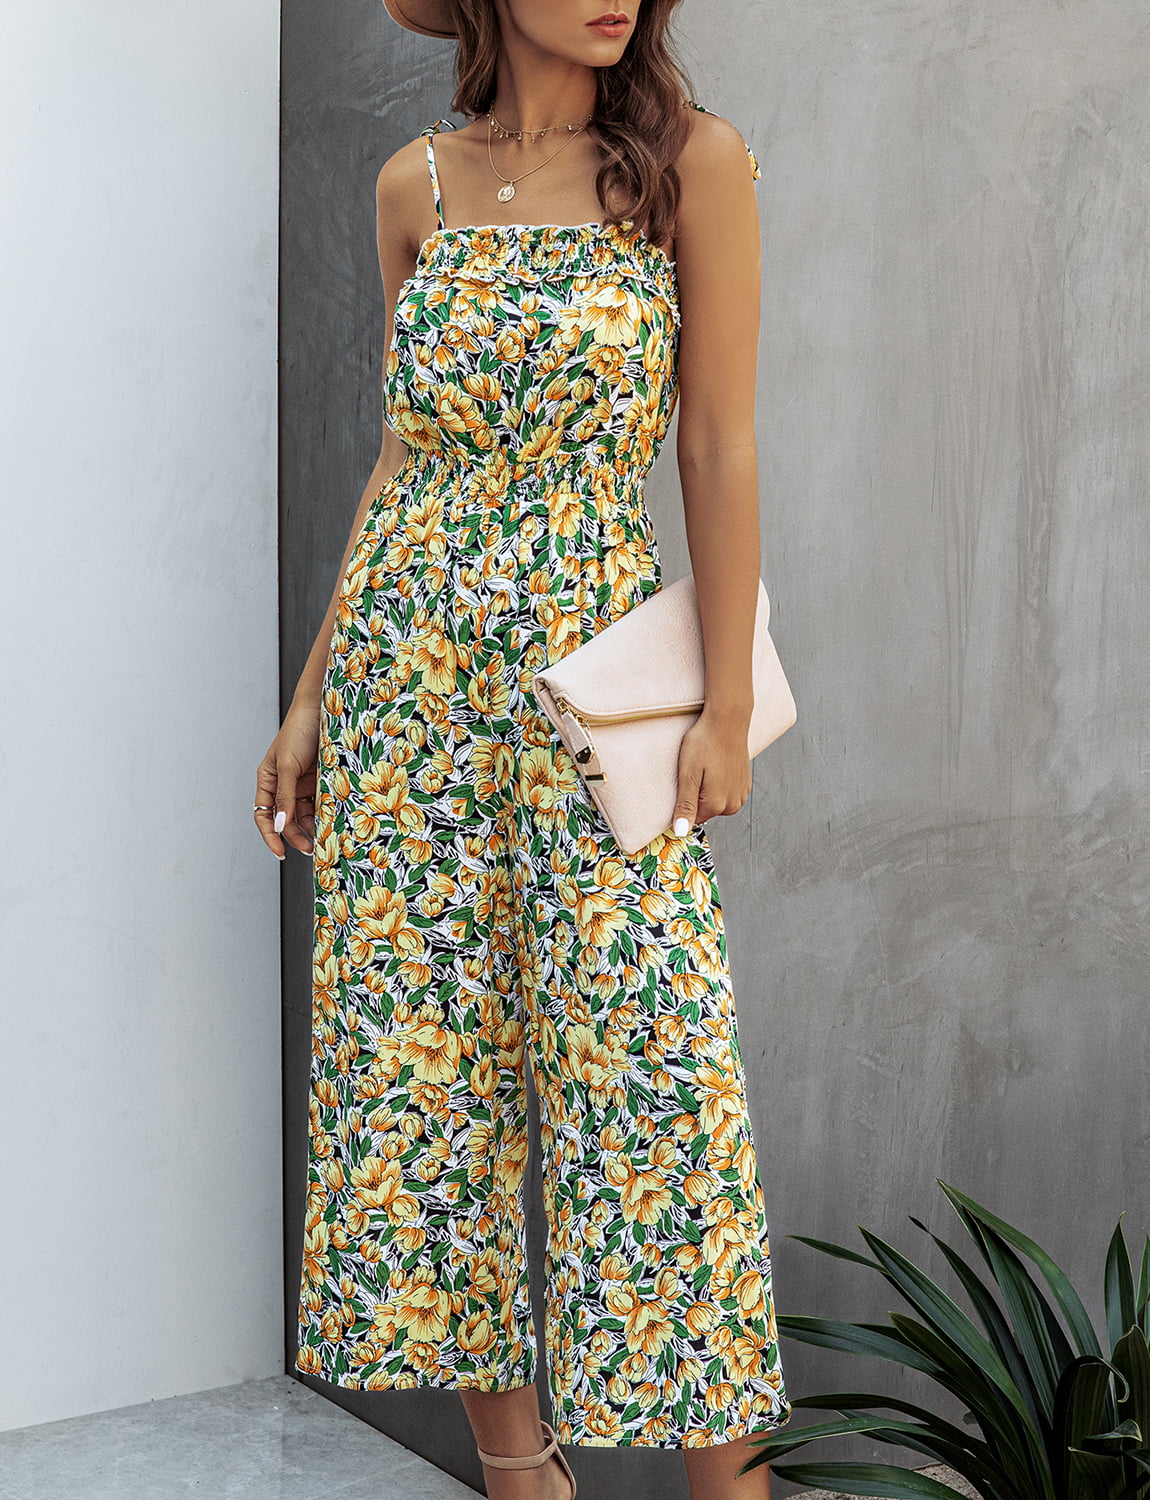 Top She Womens Summer Jumpsuits Flower Print Sleeveless Rompers Casual Beach Bohemian Lounge